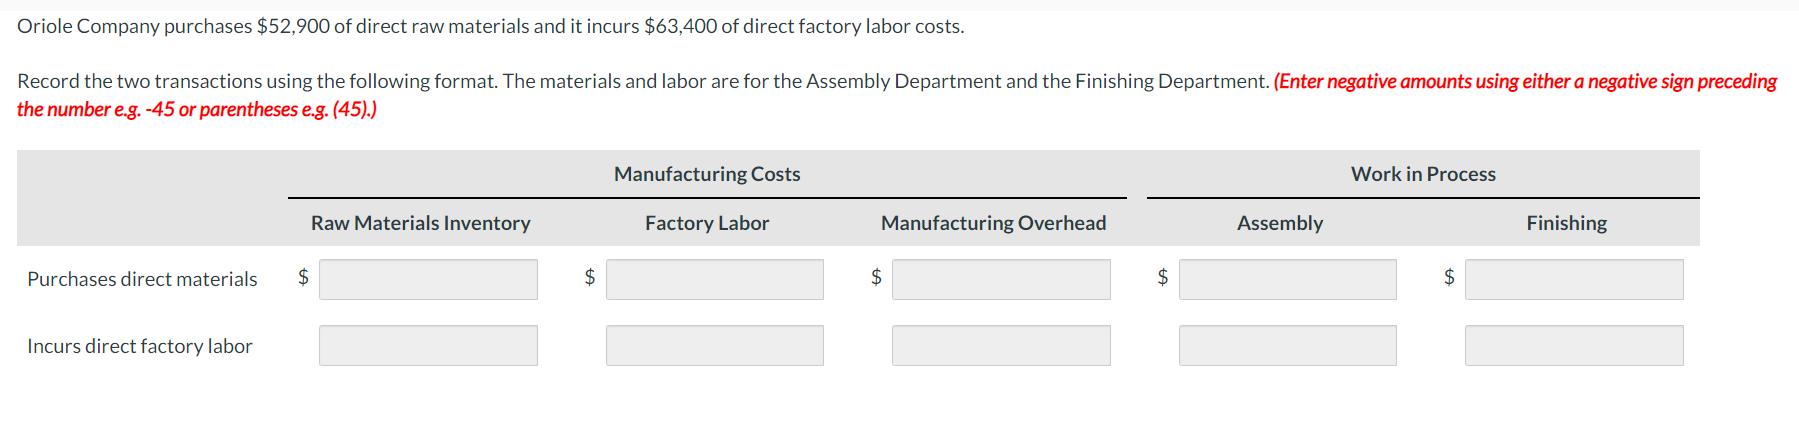 Oriole Company purchases \( \$ 52,900 \) of direct raw materials and it incurs \( \$ 63,400 \) of direct factory labor costs.